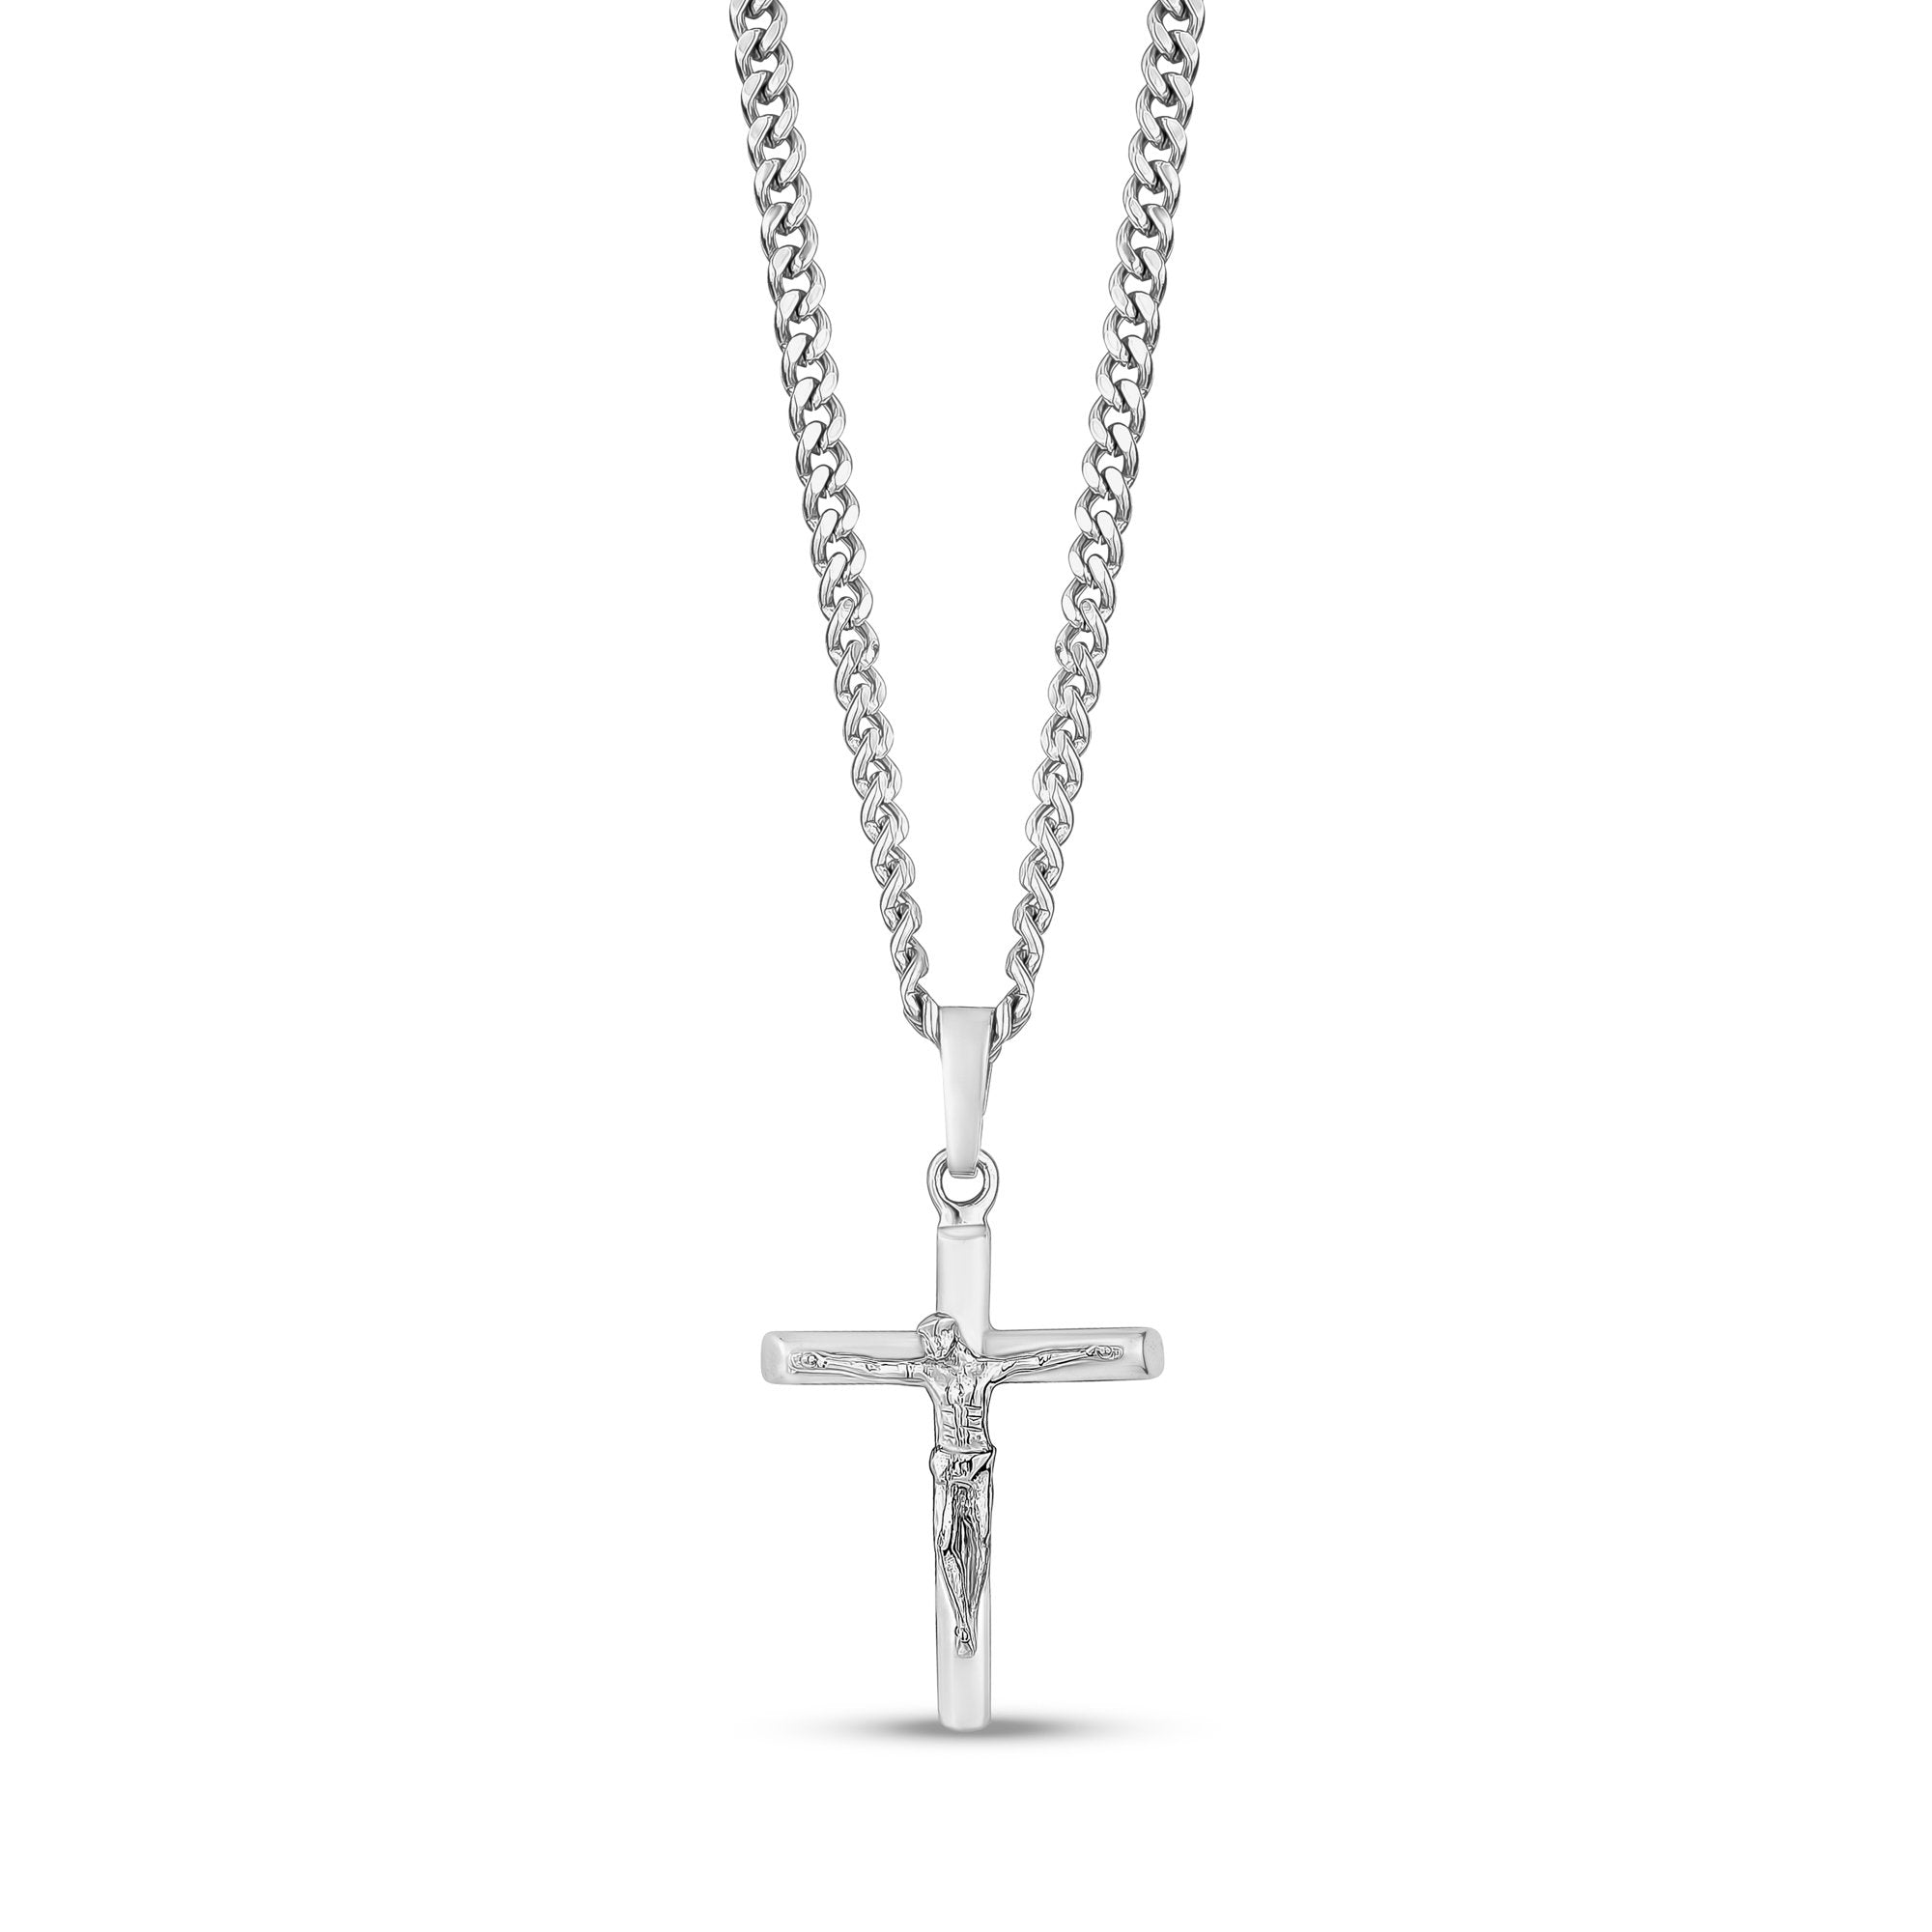 Stainless Steel Cross Necklaces for Men Rope Chain Mens Cross Chain Necklace  Black Silver Gold Cross Pendant Necklace for Men Boys Women 16-24 Inches,  16, Stainless Steel, No Gemstone : Amazon.ca: Clothing,